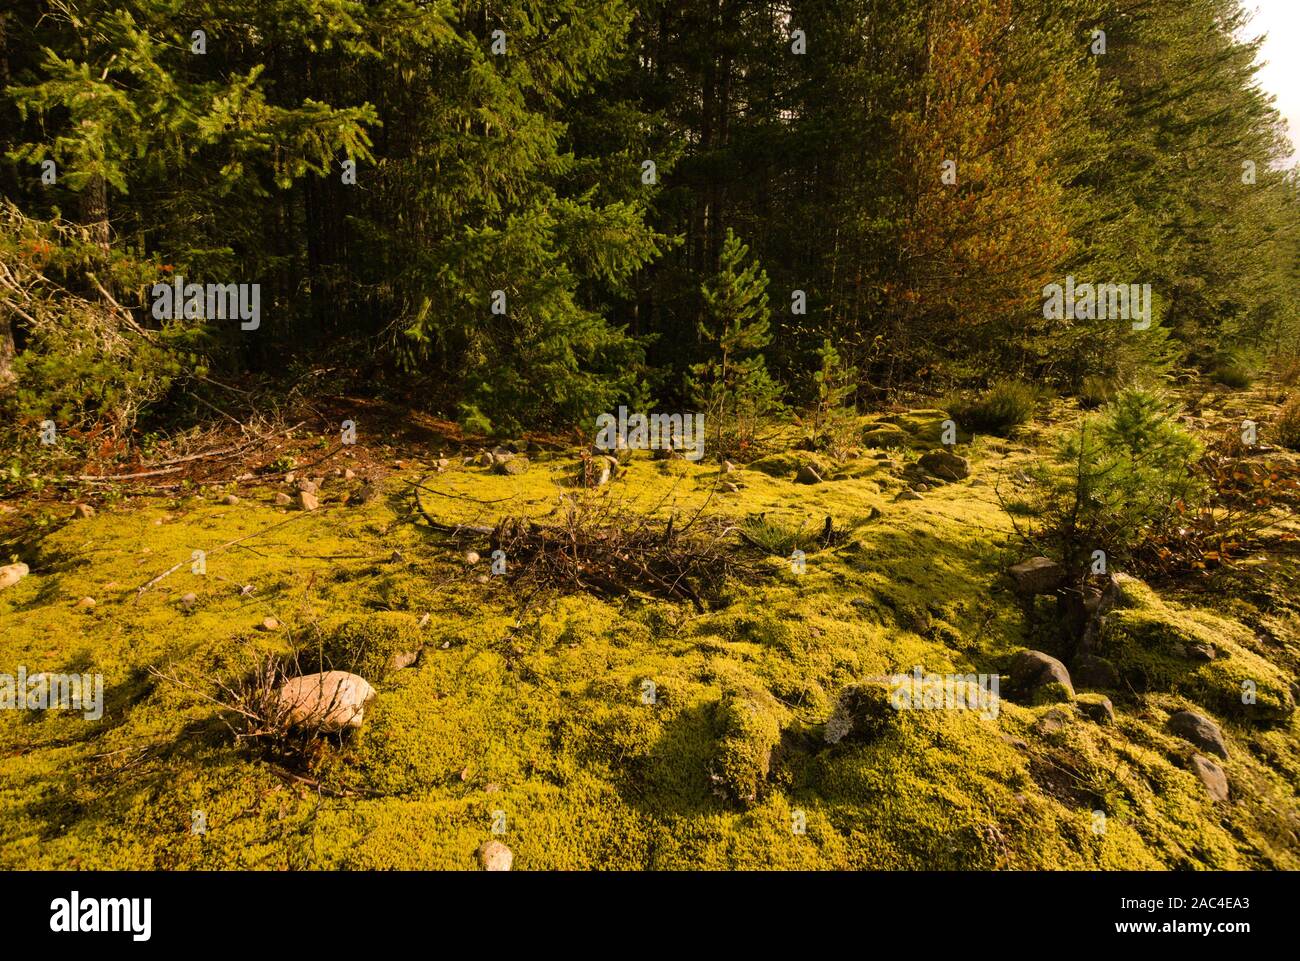 A mossy landscape by Chilliwack Lake Road in Chilliwack, British Columbia, Canada Stock Photo